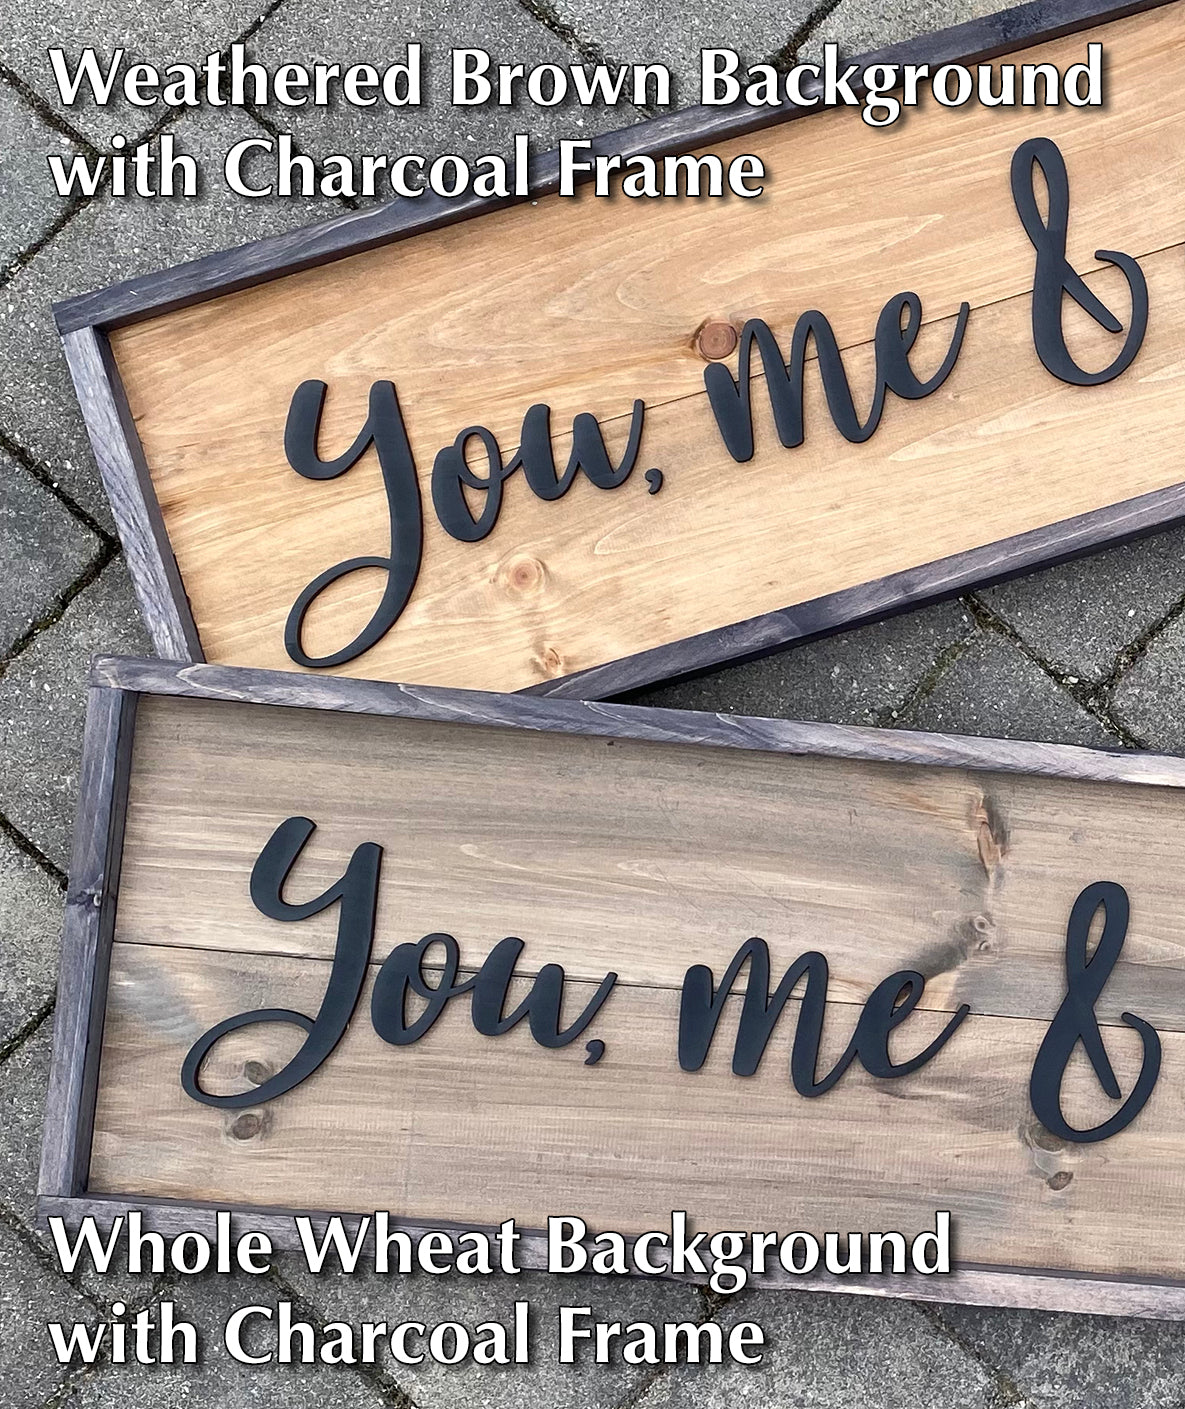 You Me and Our Three, 3D Large Farmhouse Style Decor Custom Wood Sign, Bedroom Decor, Personalized Living Room Family Saying